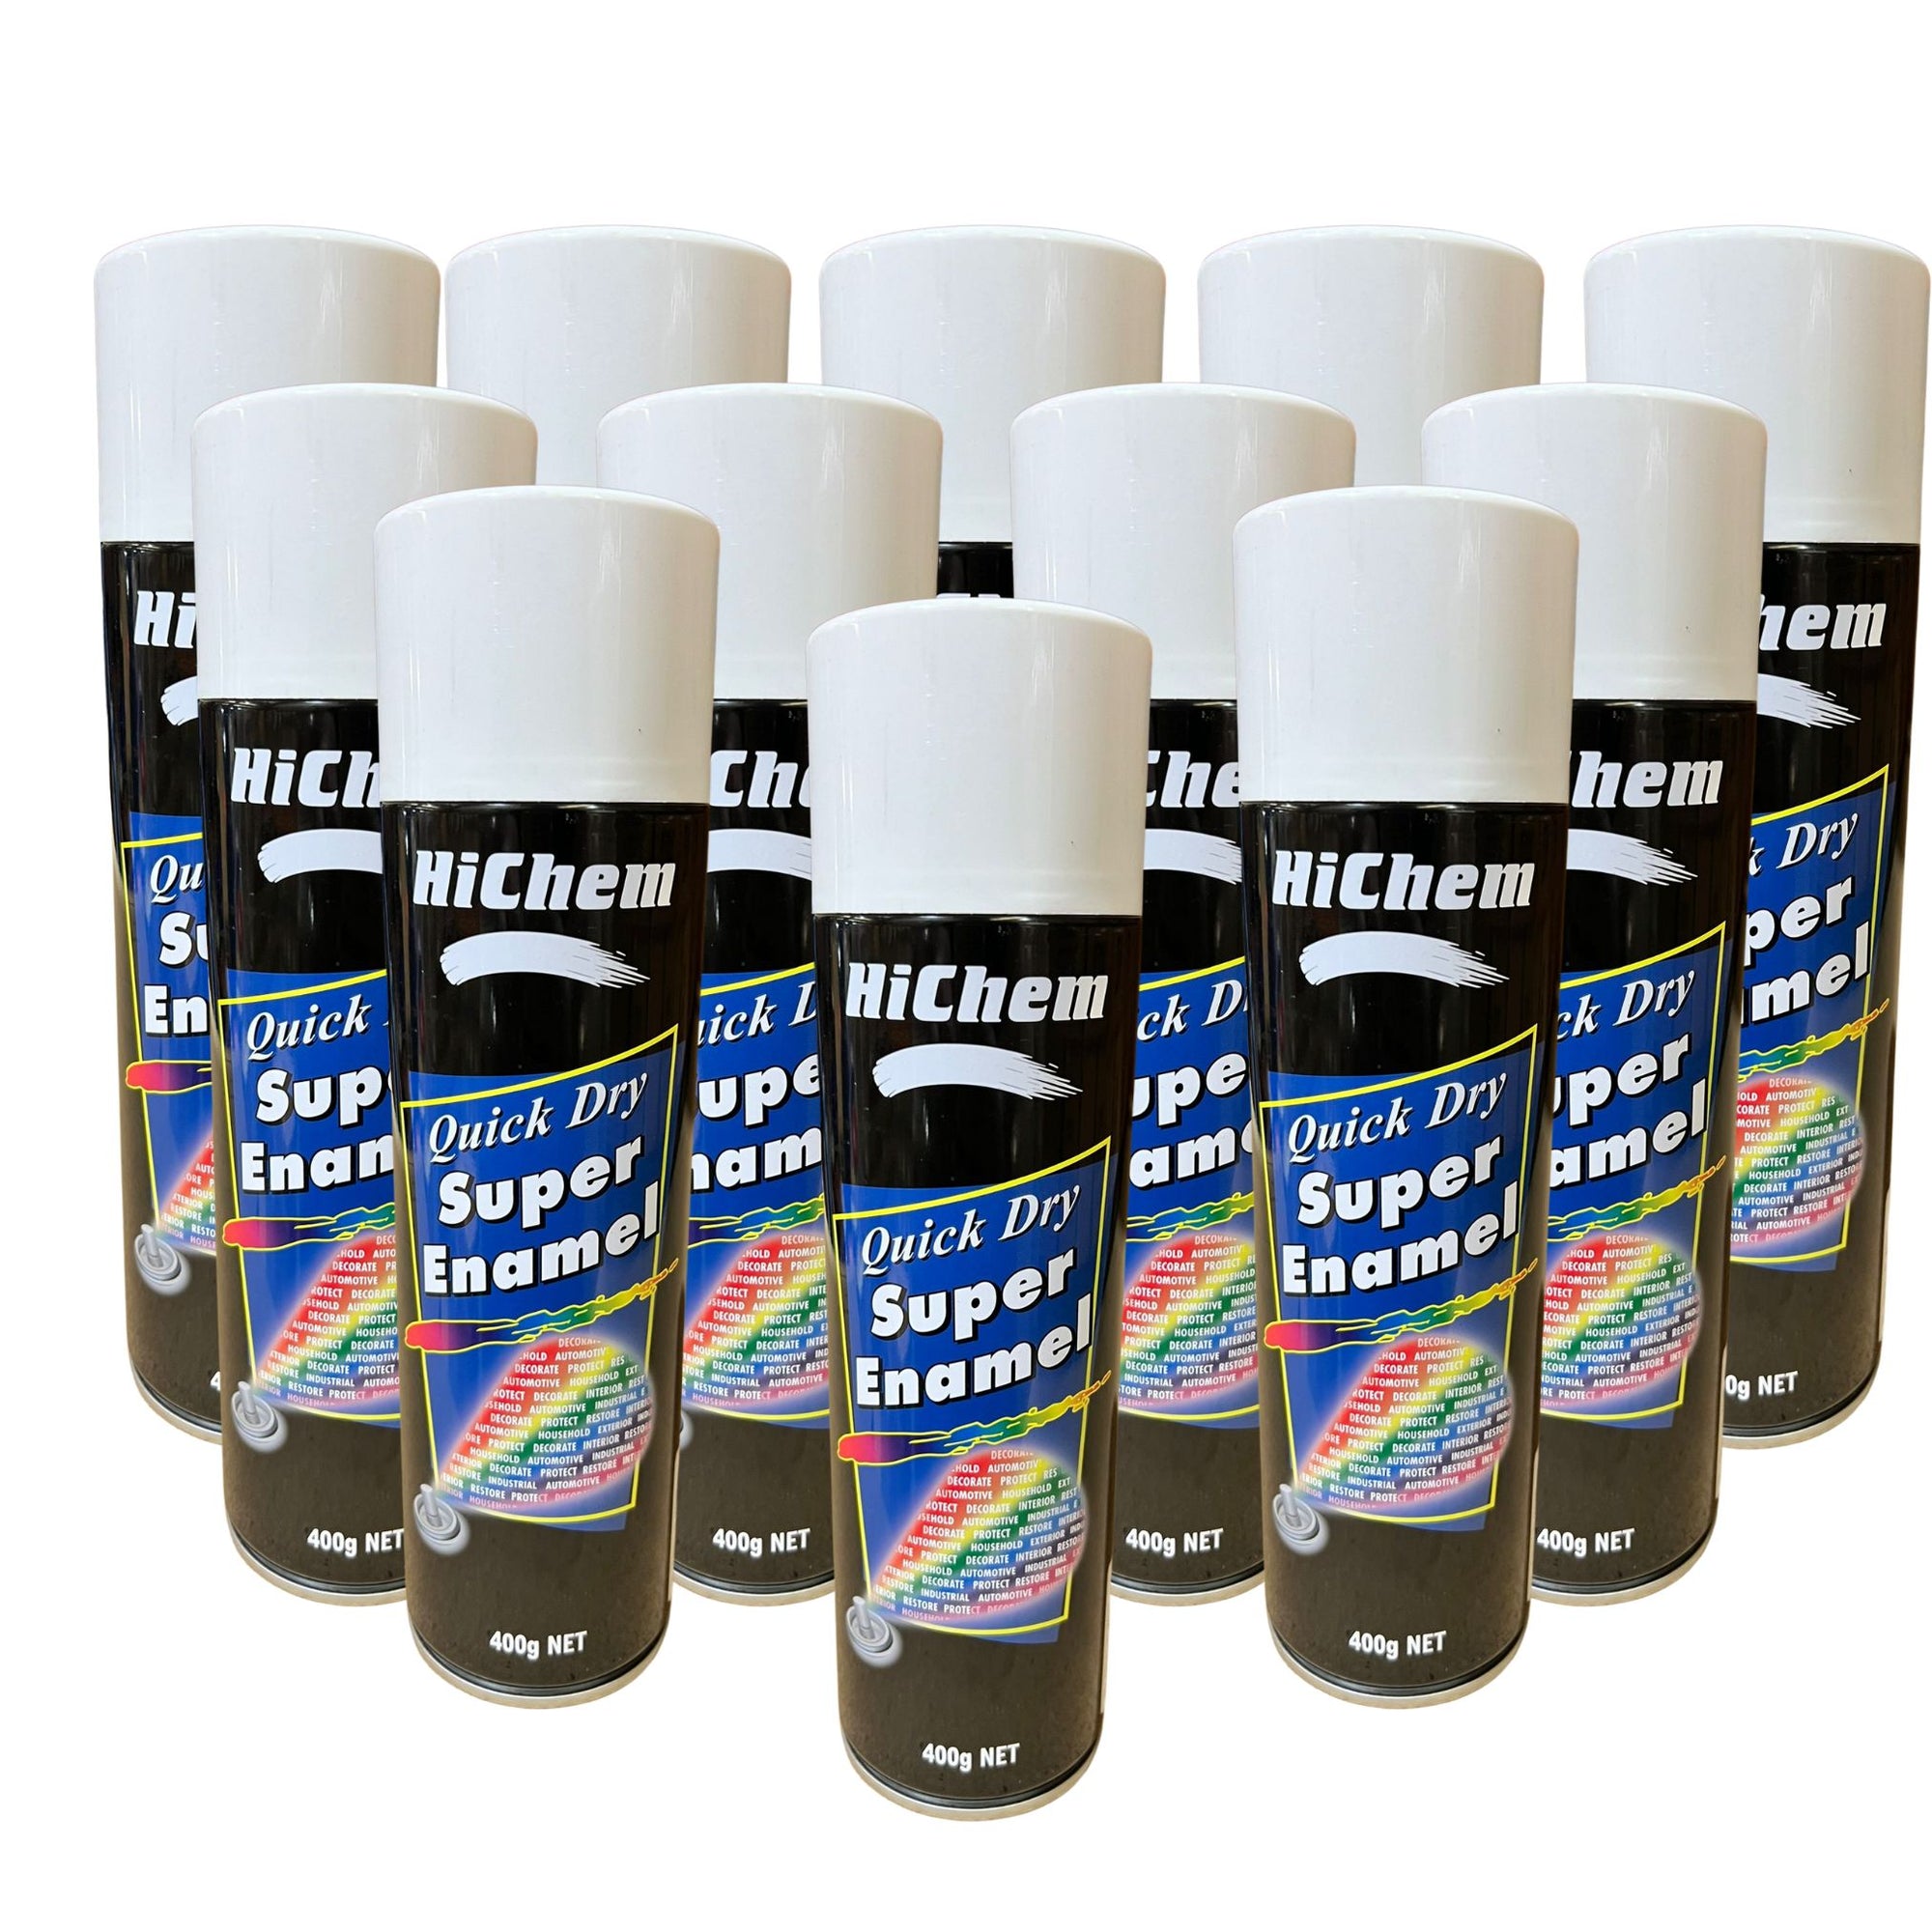 Hichem Quick Dry Super Enamel Spray Paint 12 Cans - Gloss White - South East Clearance Centre